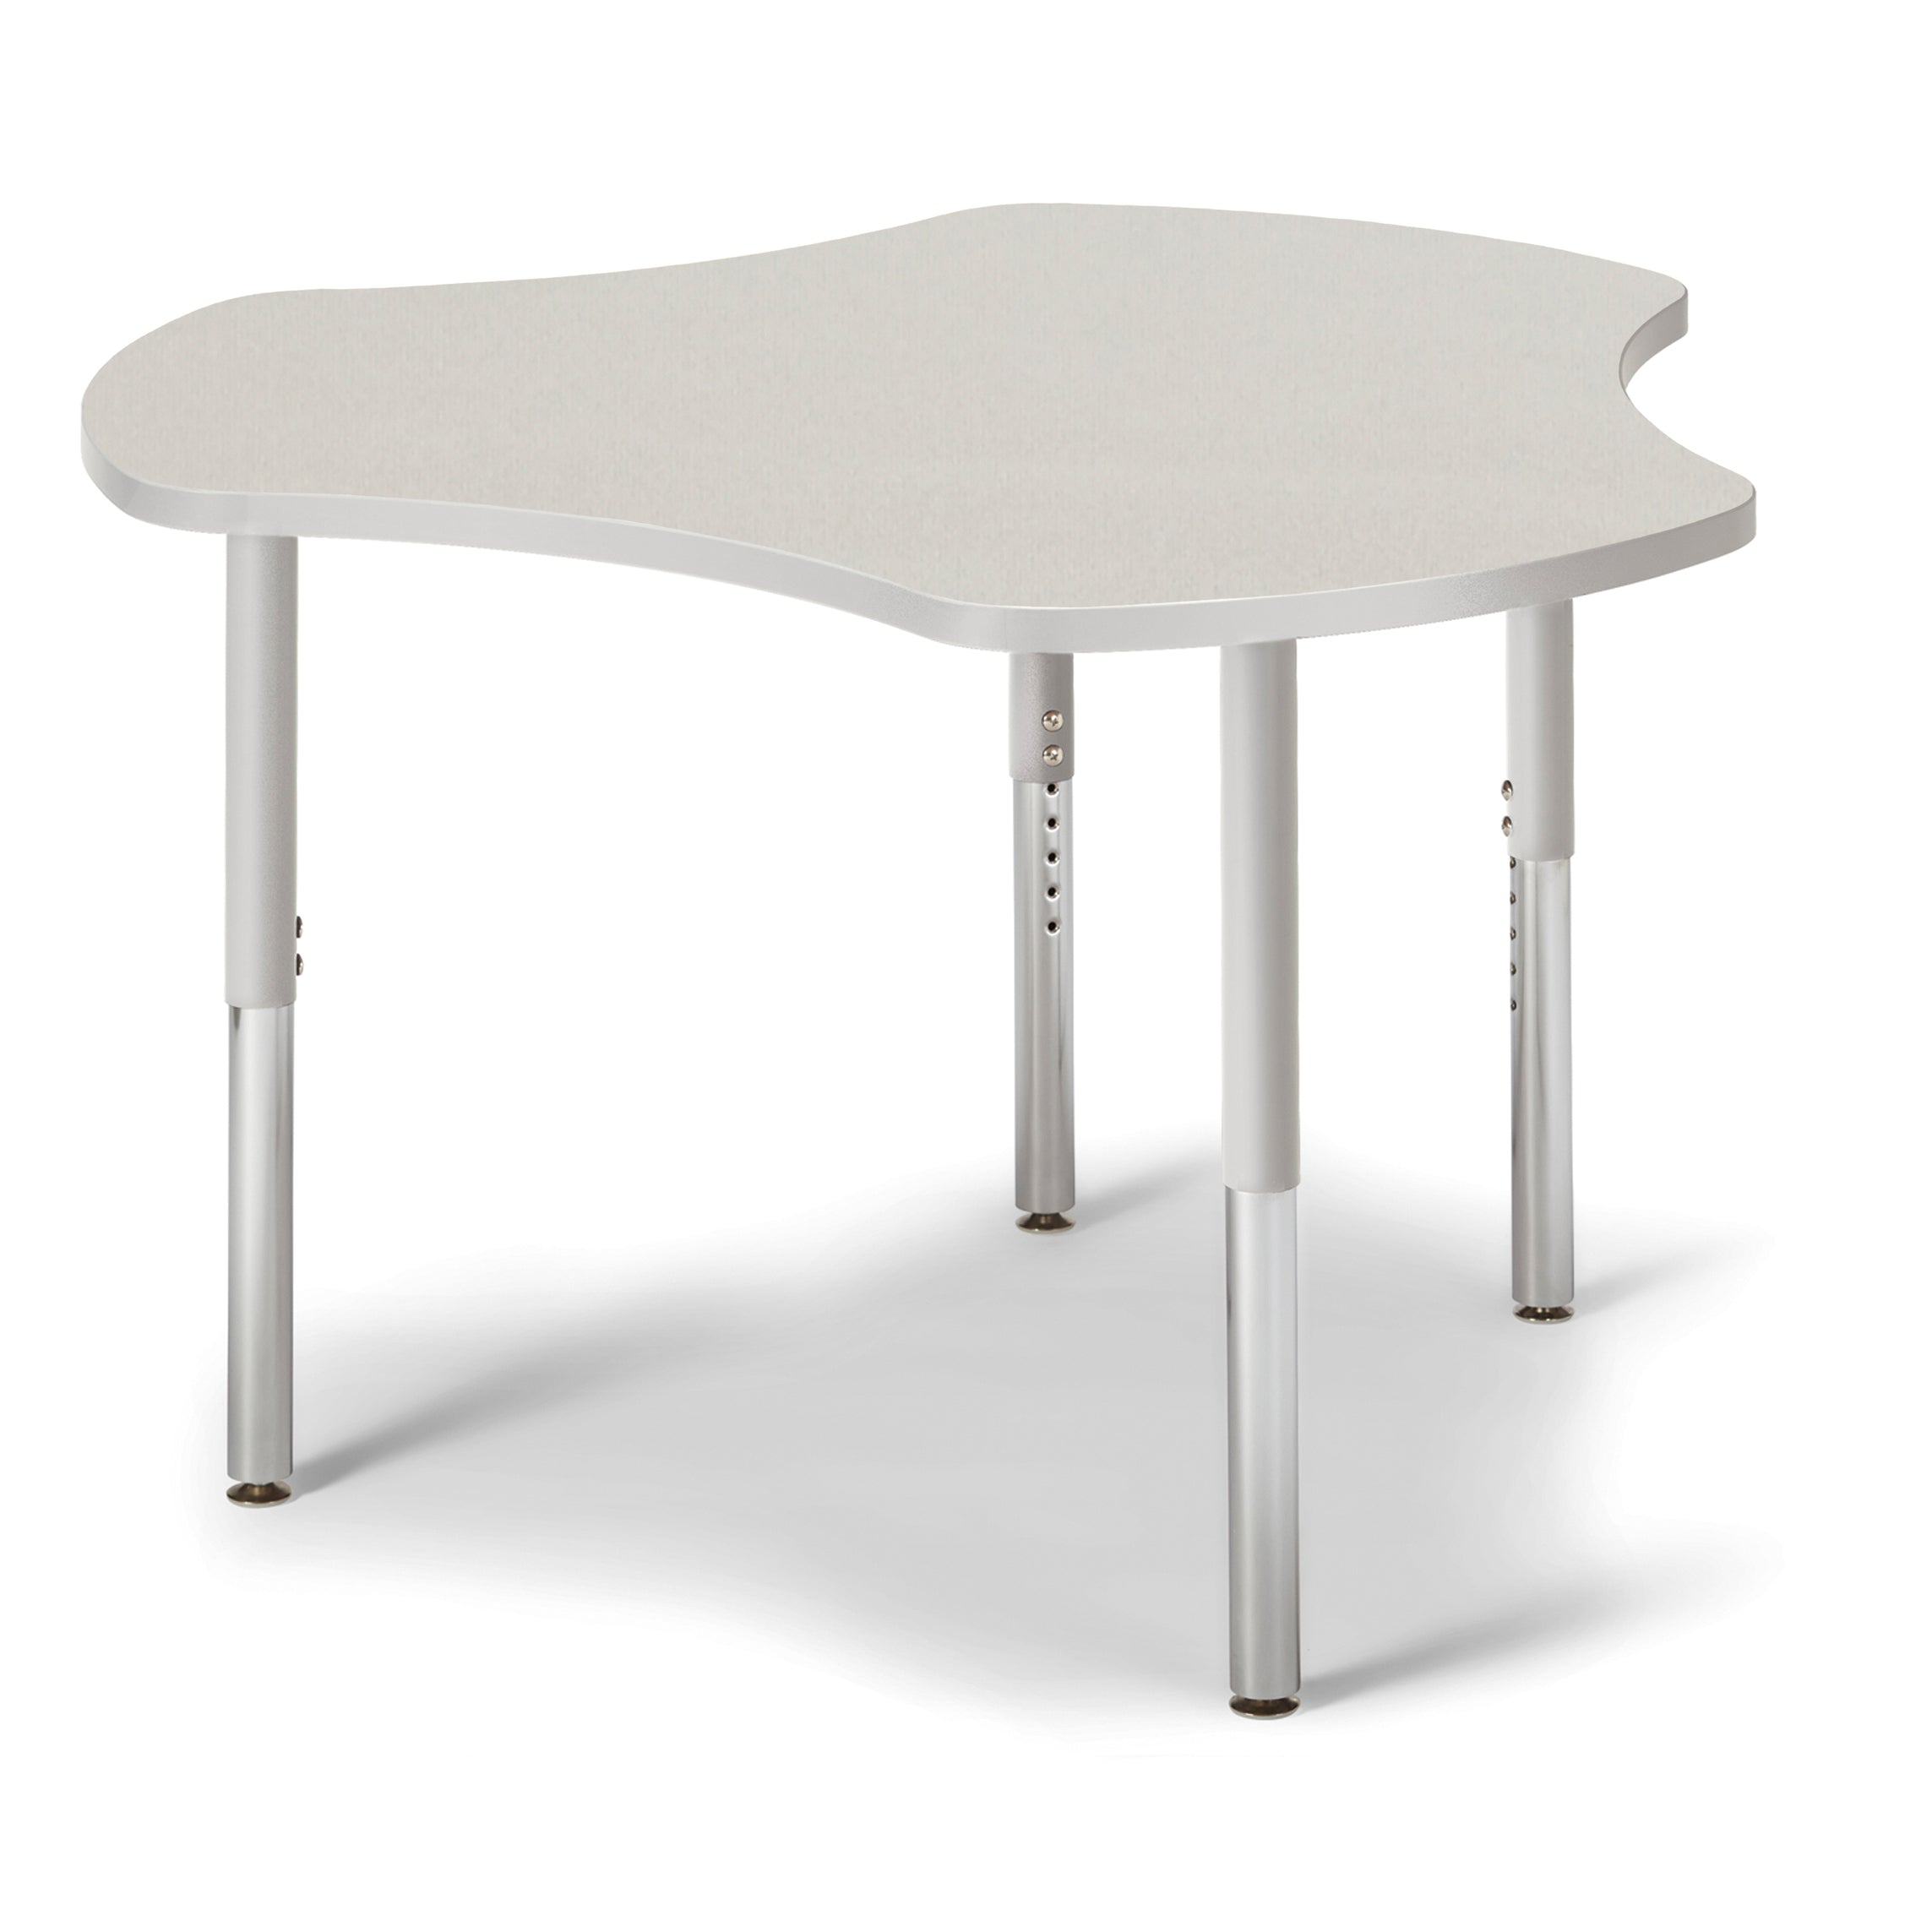 6311JCS000, Berries Collaborative Hub Table - 44" X 47" - Freckled Gray/Gray